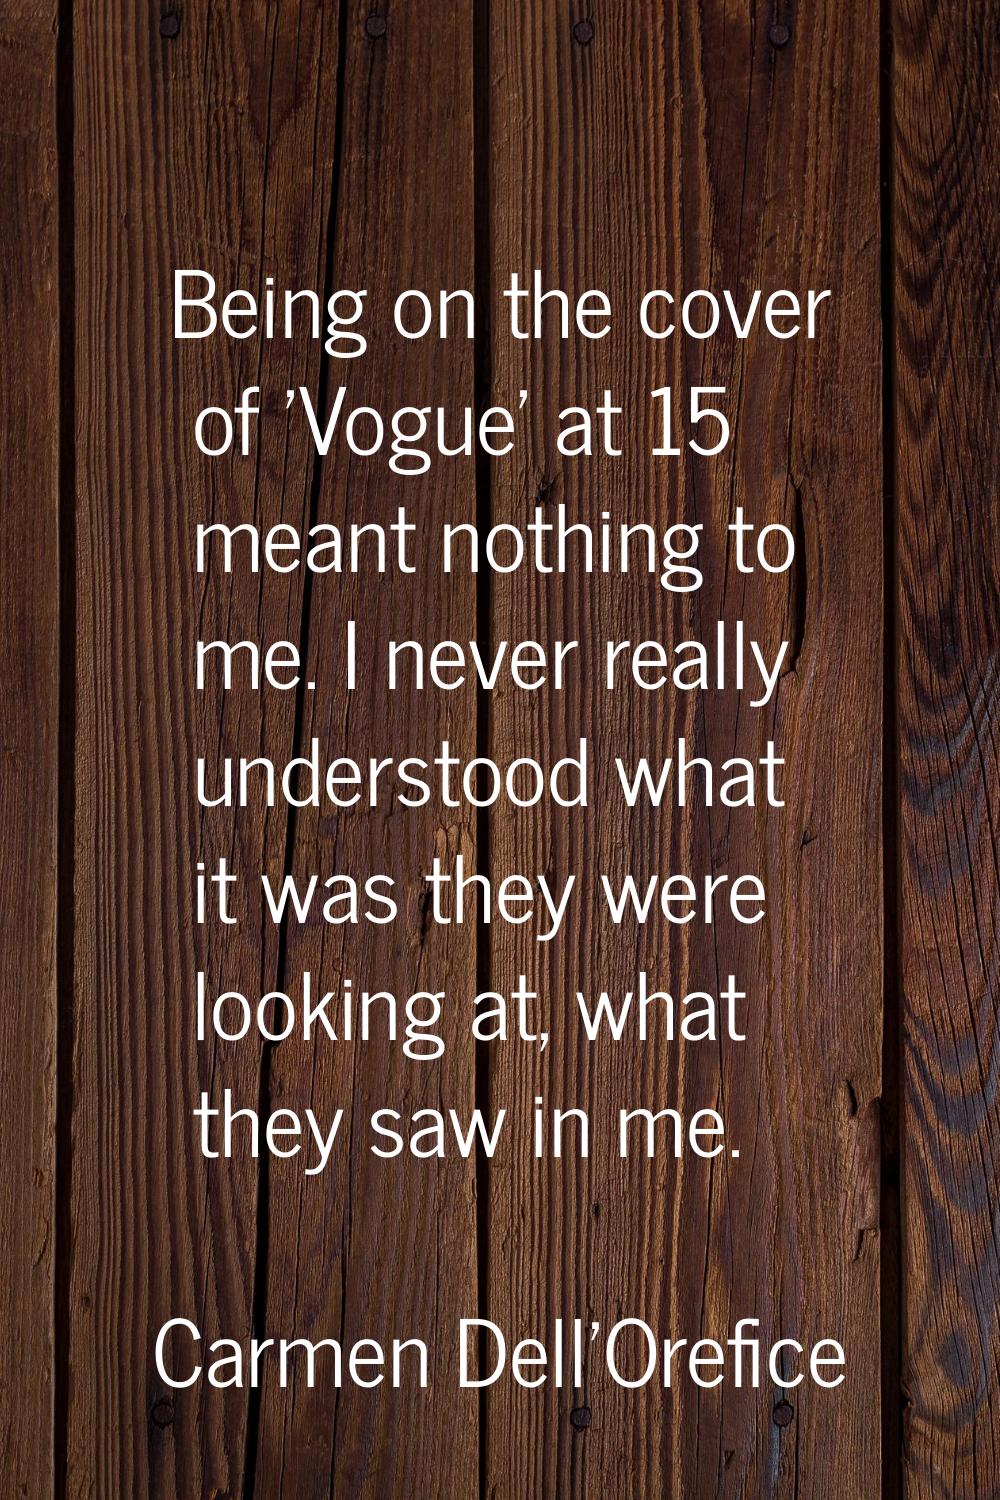 Being on the cover of 'Vogue' at 15 meant nothing to me. I never really understood what it was they